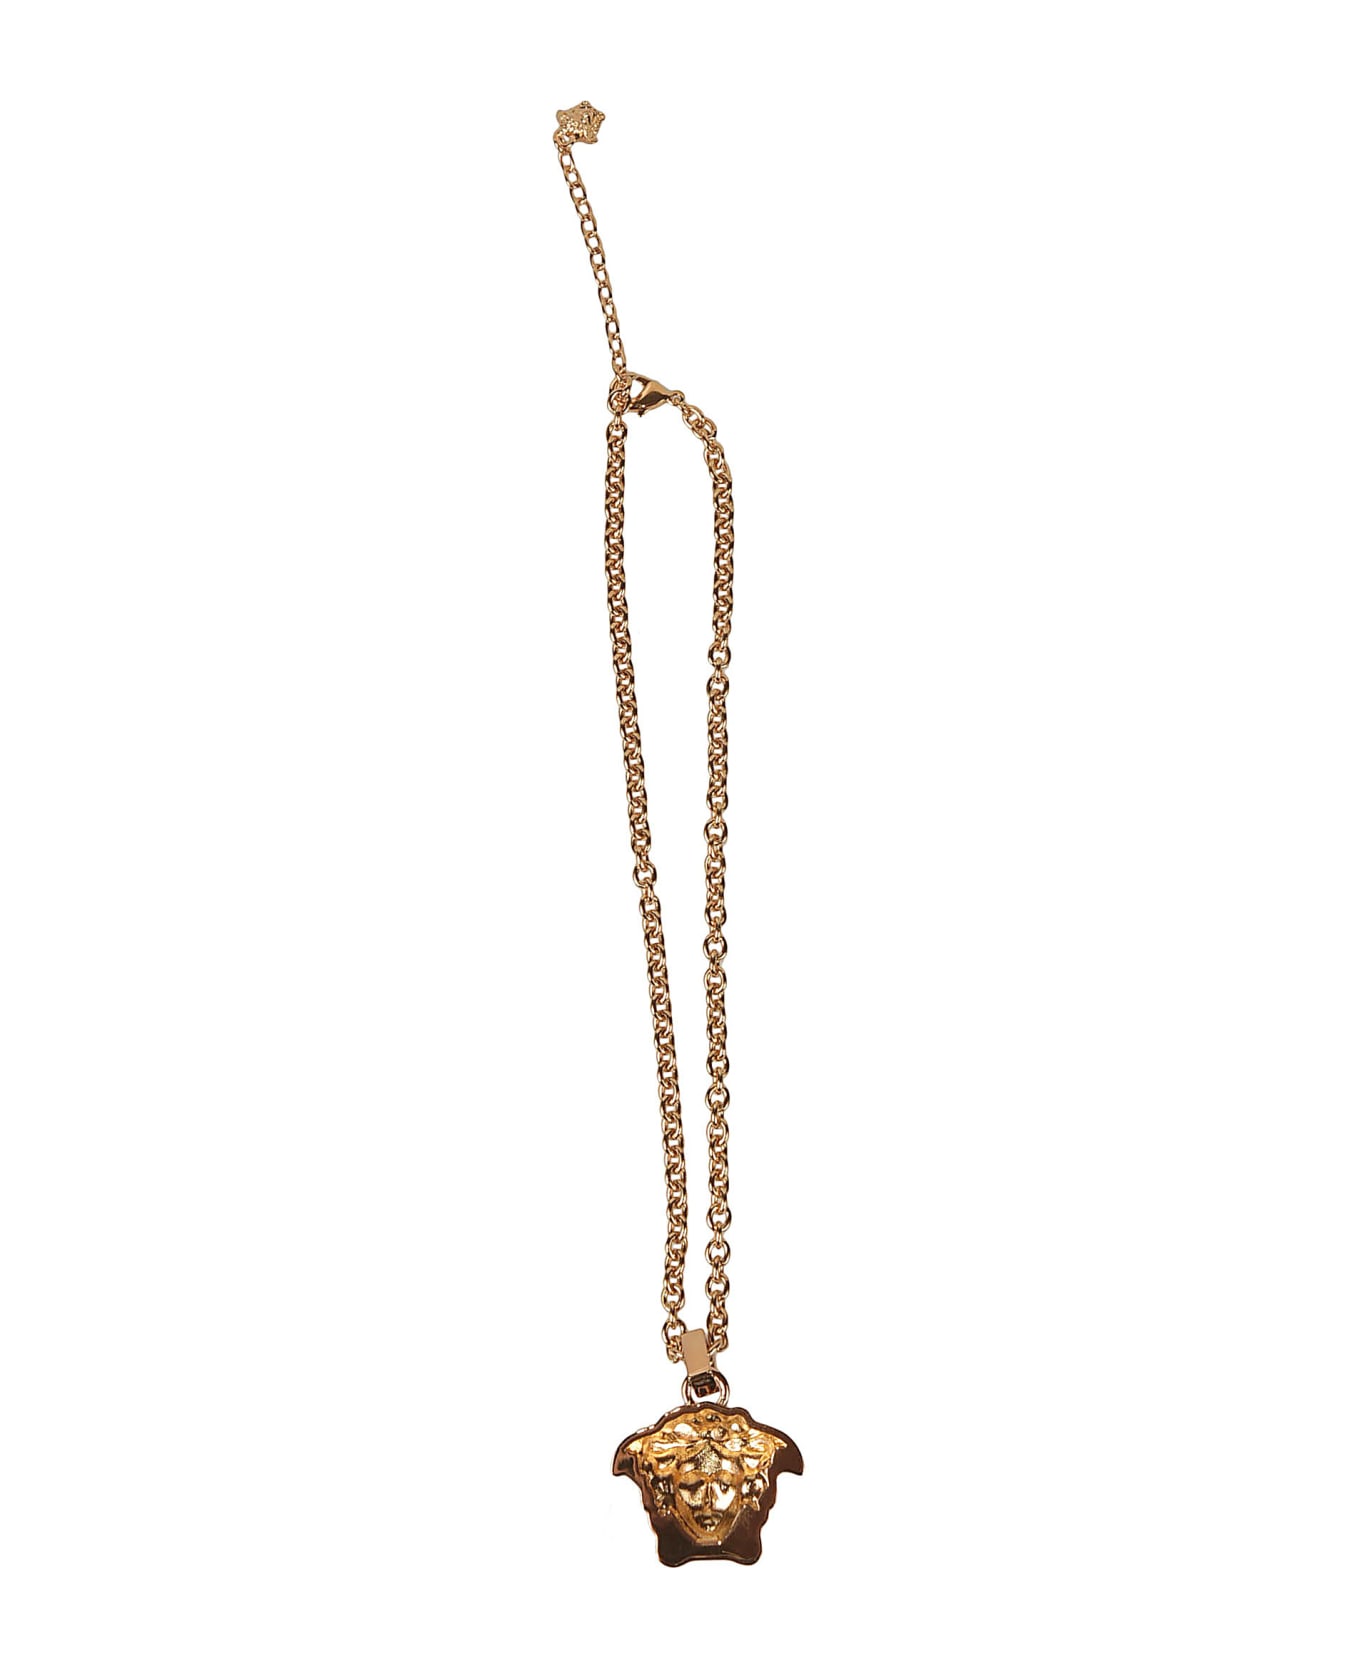 Versace Medusa Pendant Chain Necklace - Gold ネックレス